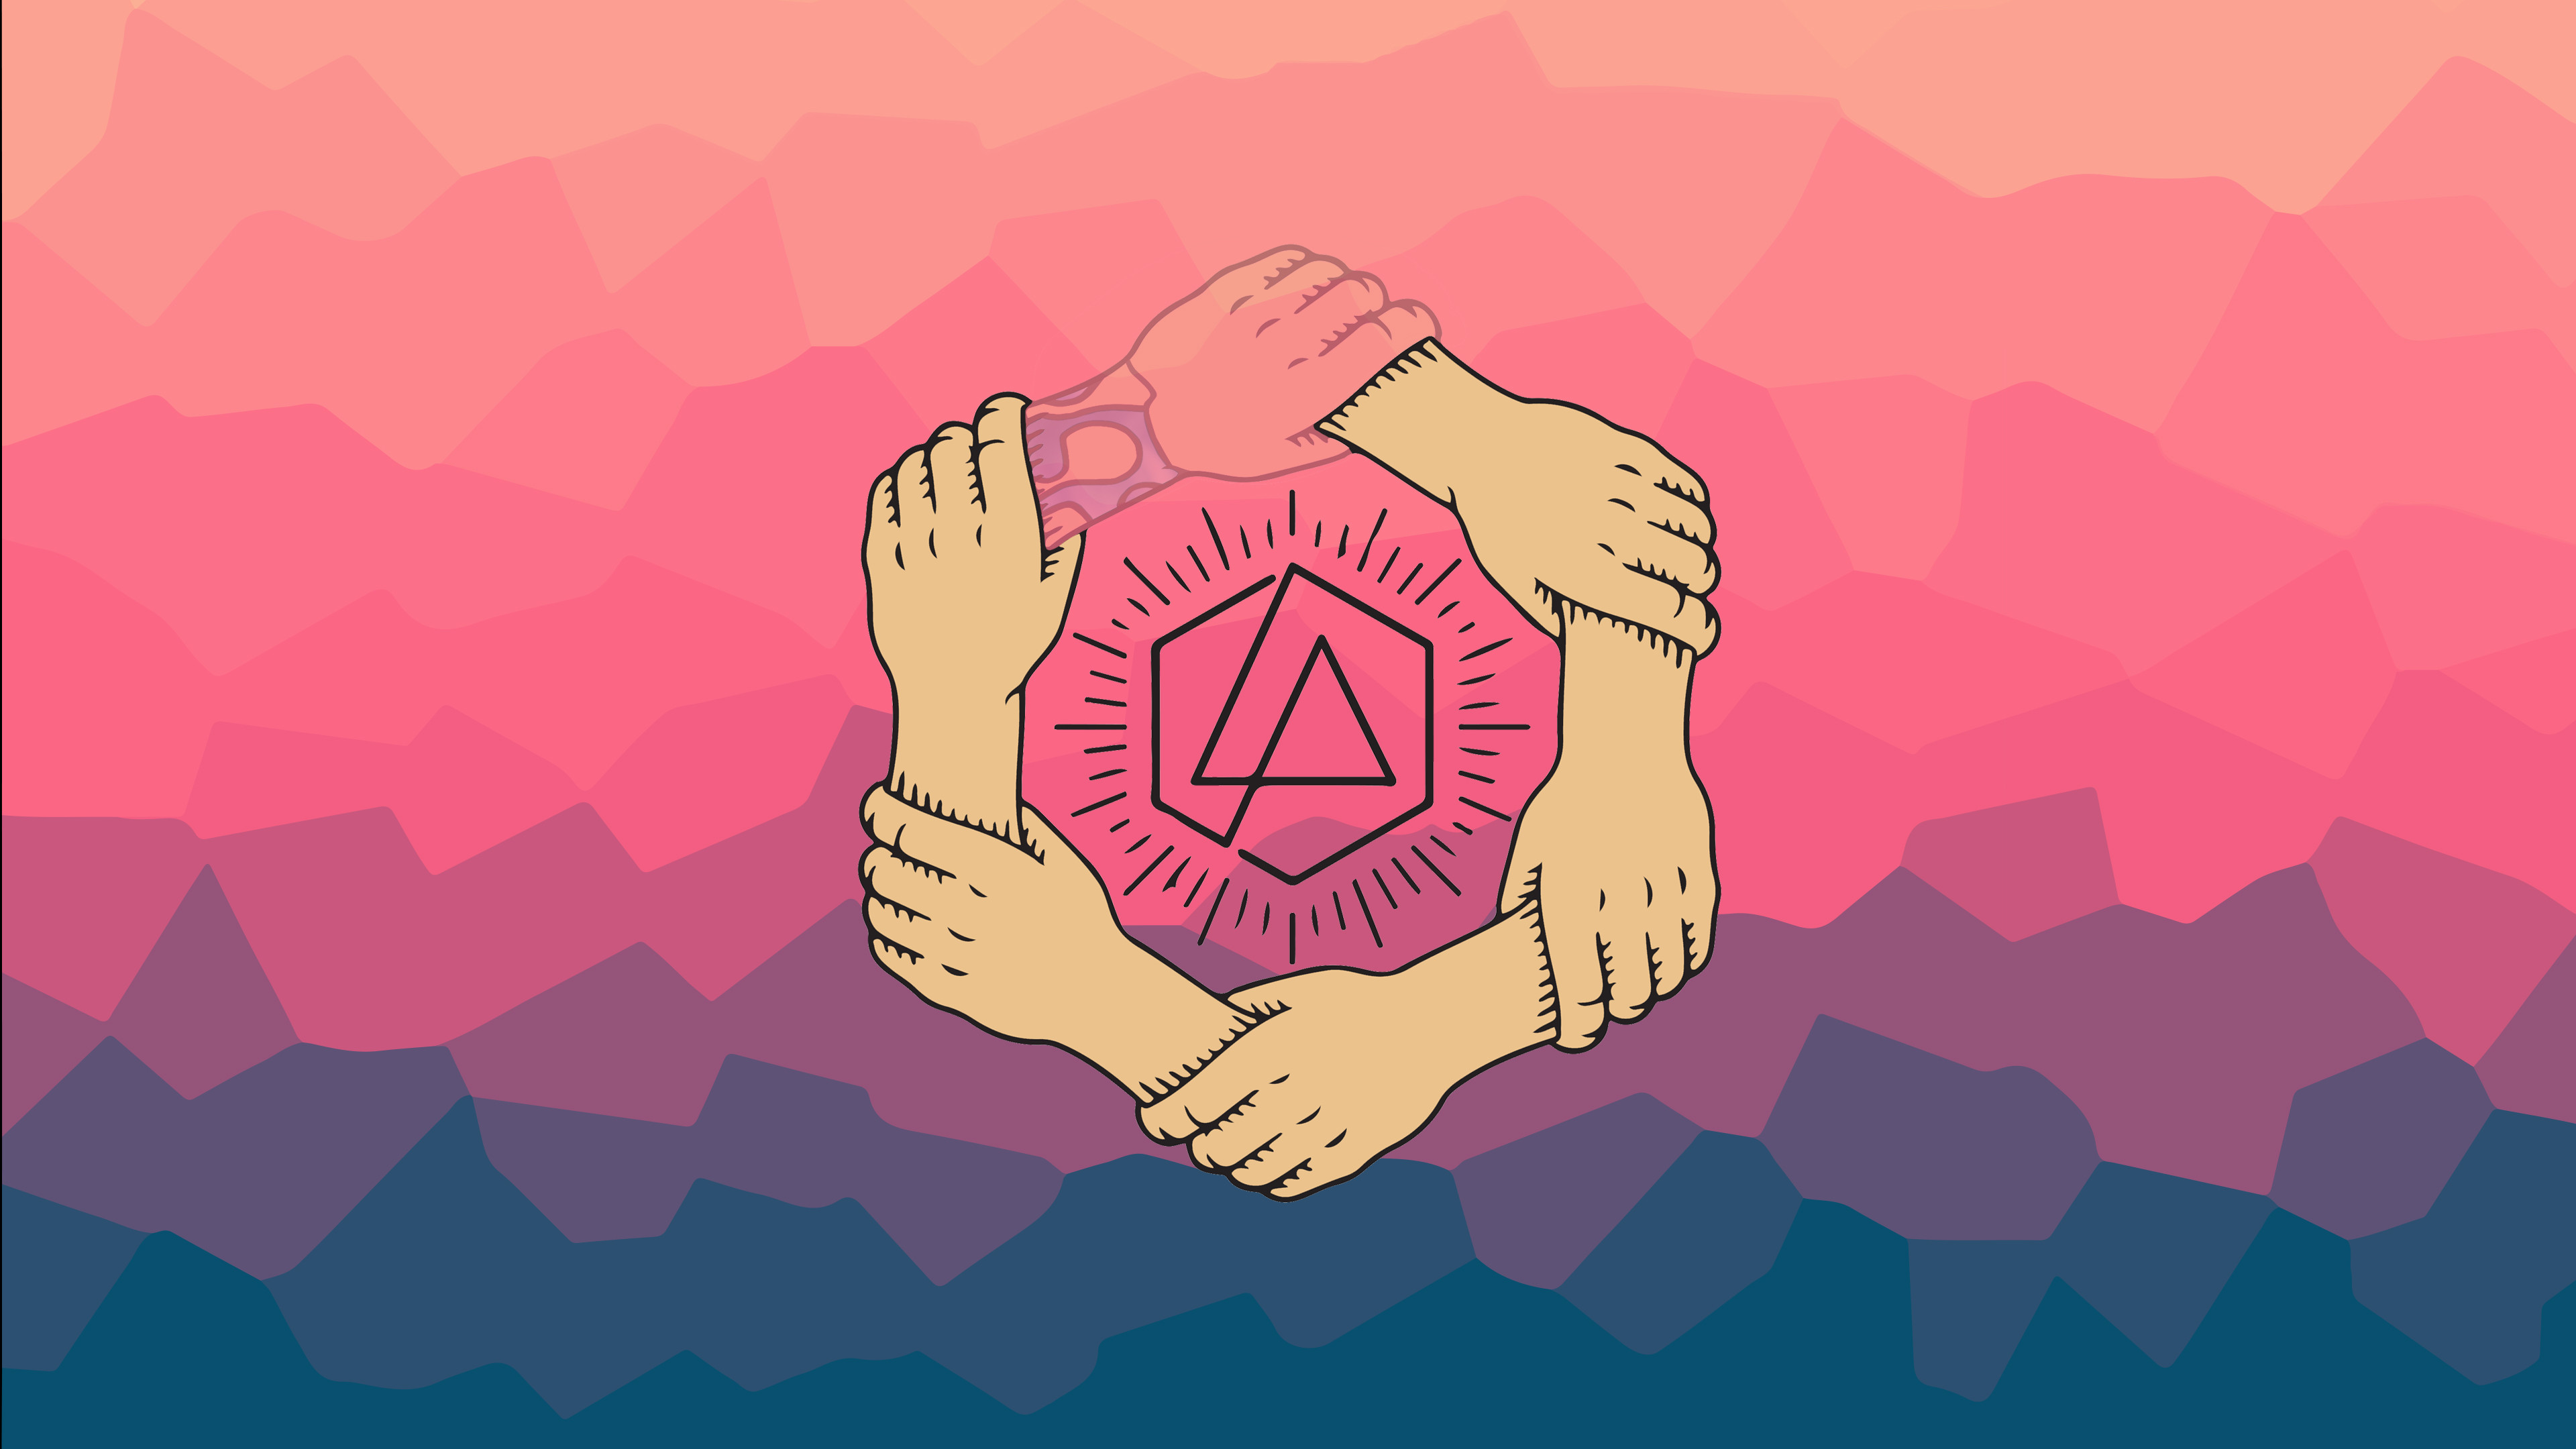 3840x2160 Linkin Park tribute desktop and phone wallpaper | direct links in comments